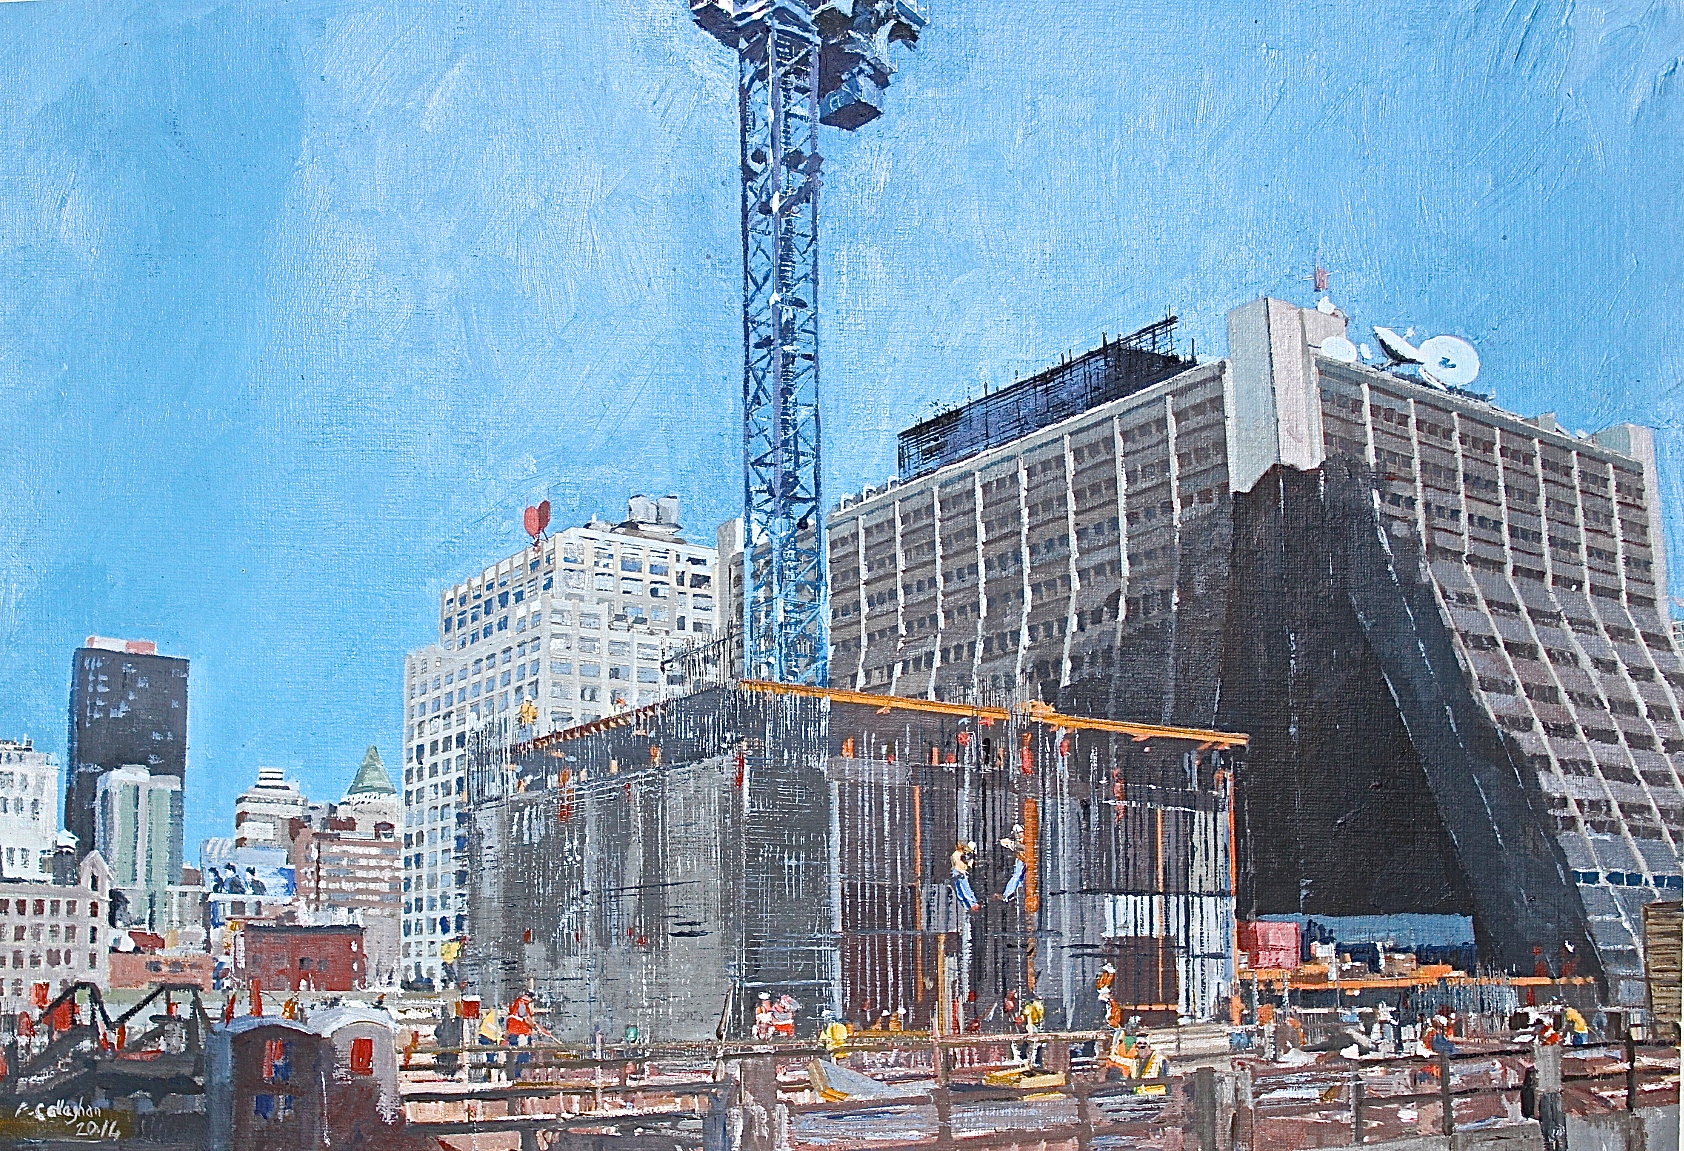 NY Construction site 42nd Street Painted by Frank Callaghan